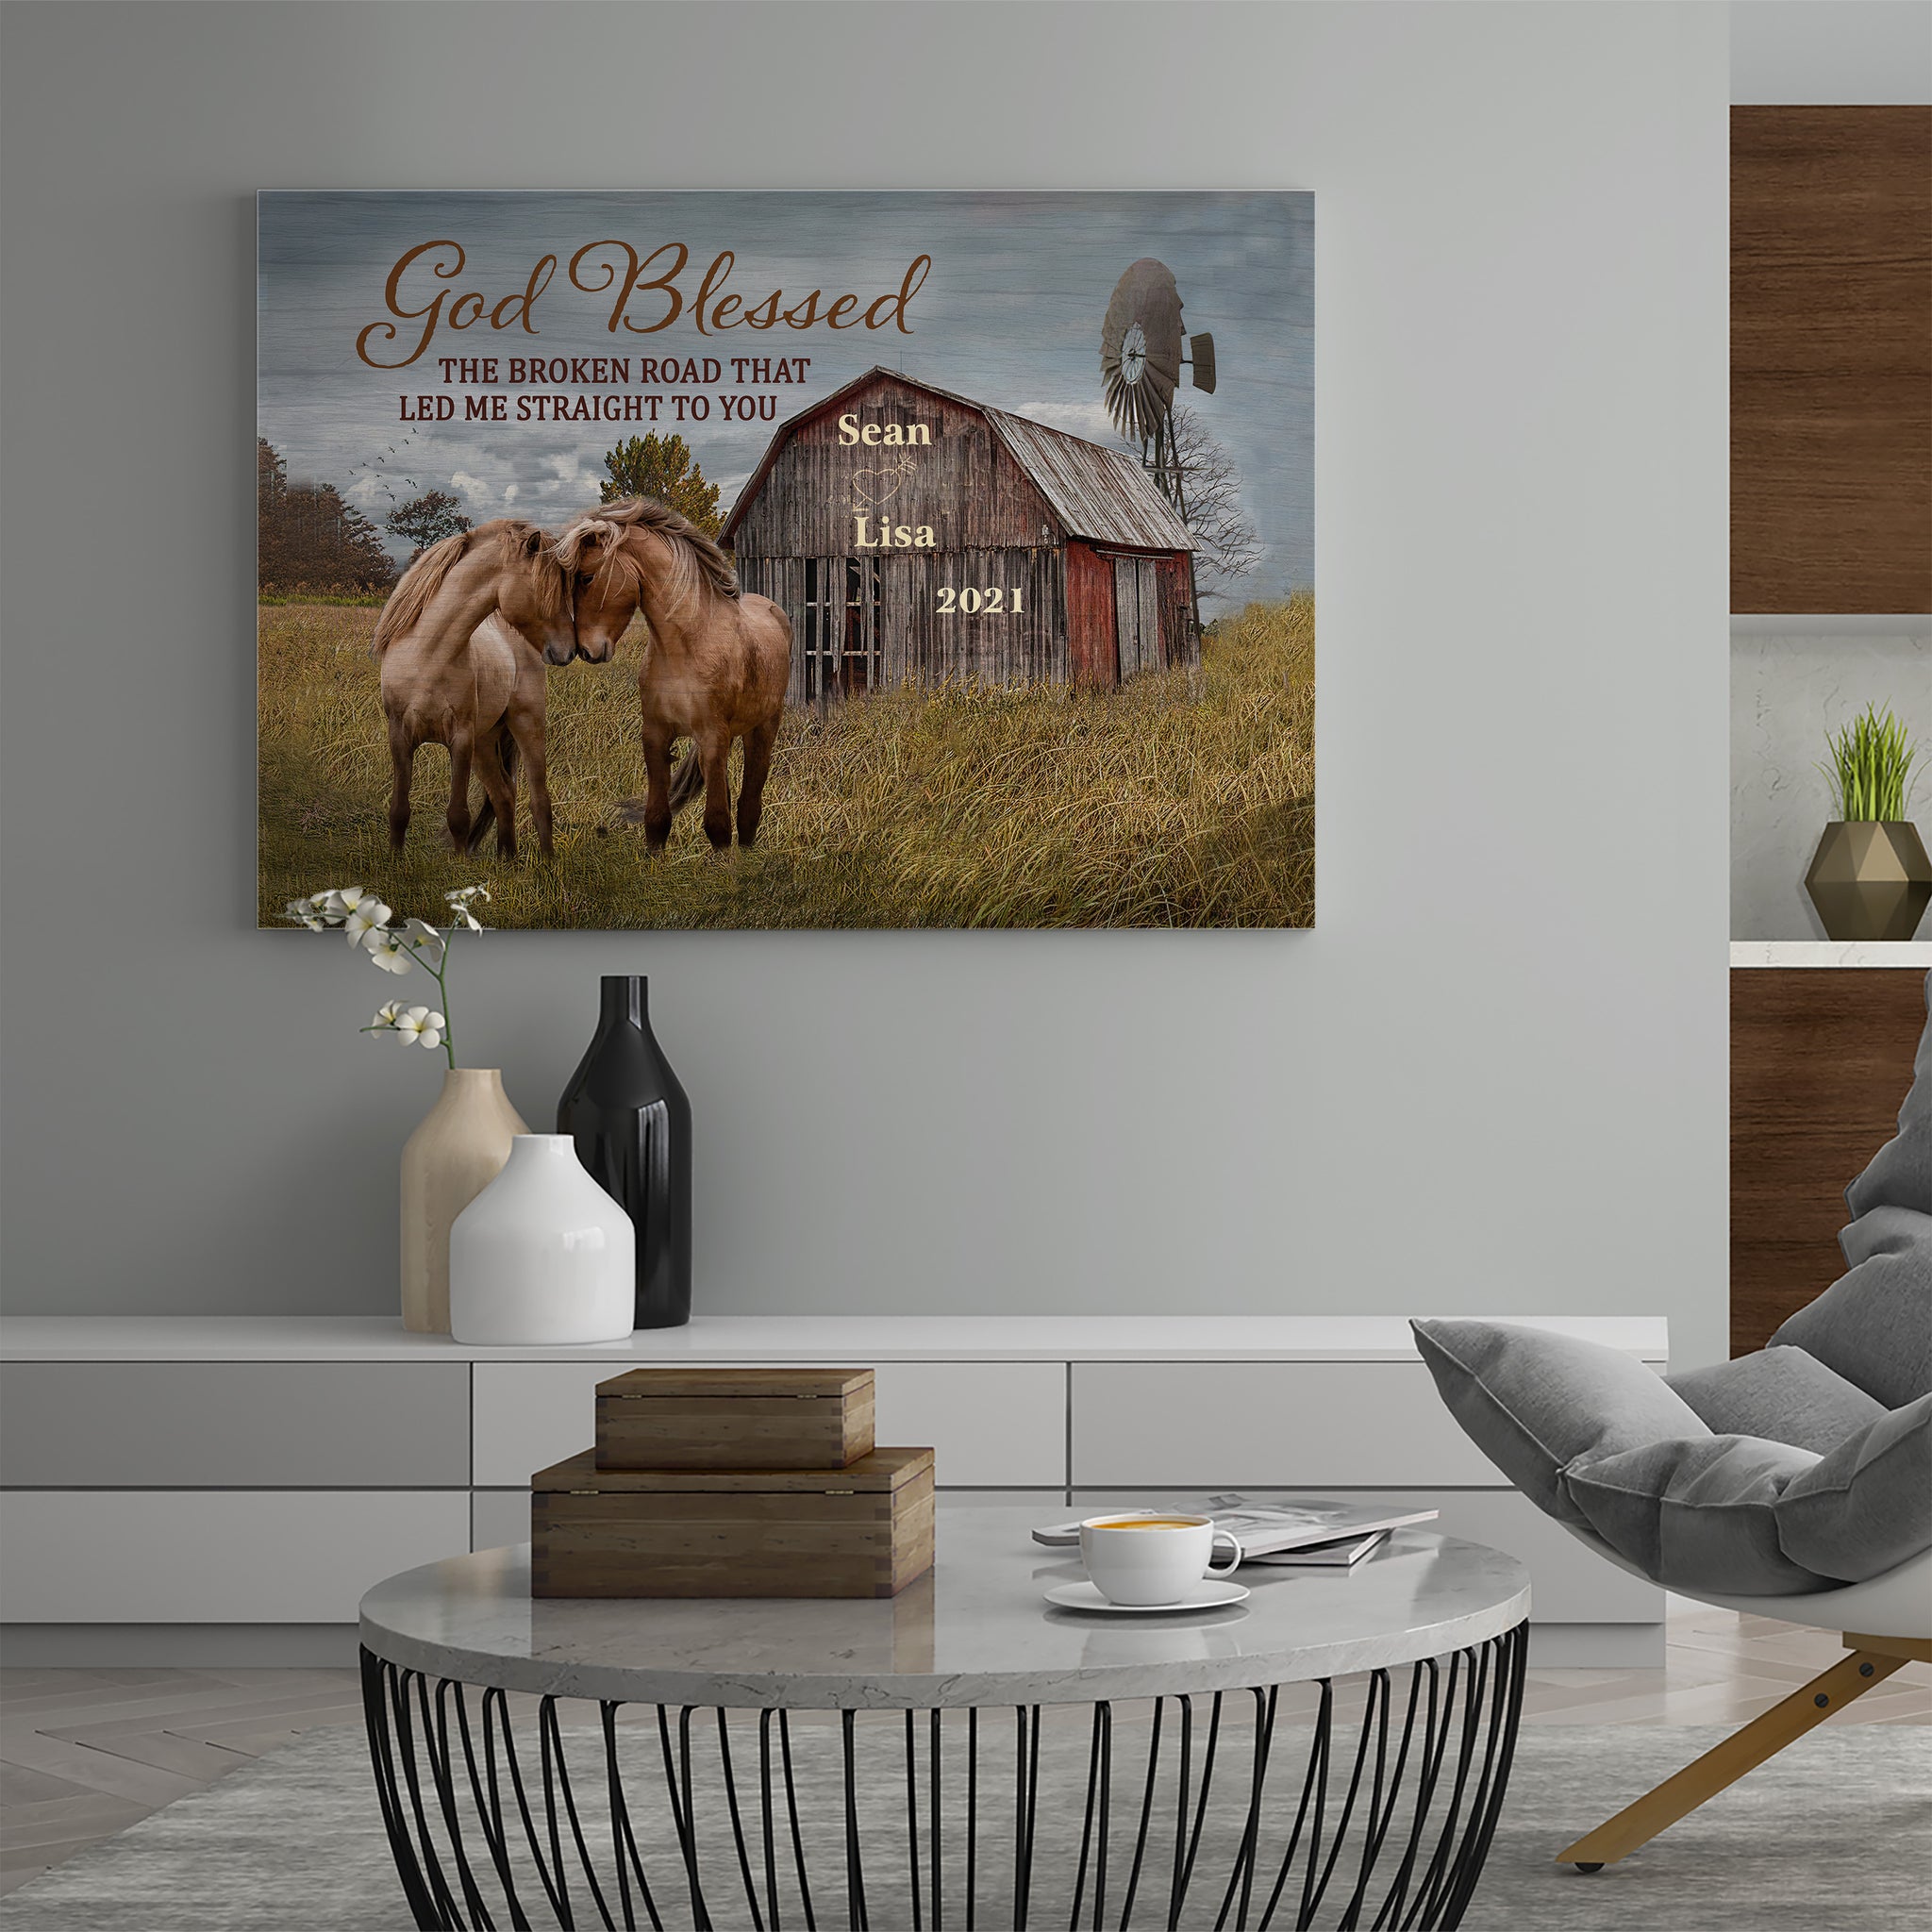 Canvas Wall Art, God Blessed The Broken Road Poster, Wedding Gifts, 1st Anniversary, Couple Gifts, Horse Lover Gifts, Farmhouse Christmas Decor, Wall Art For Living Room